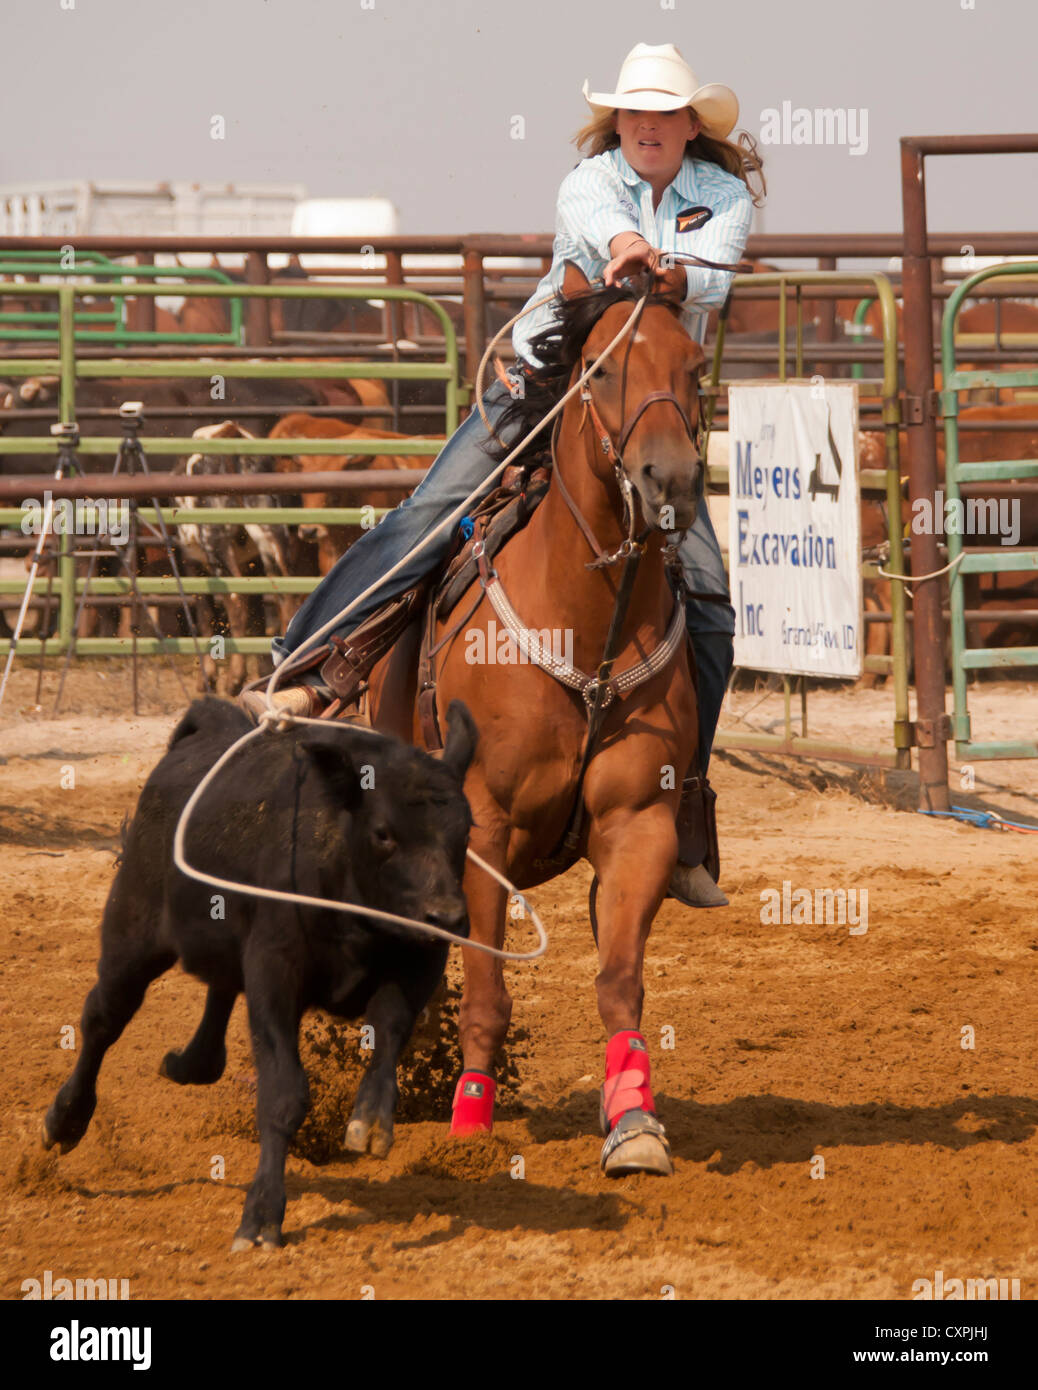 Cowgirl on her saddle horse calf roping at the Rodeo, Bruneau, Idaho, USA Stock Photo